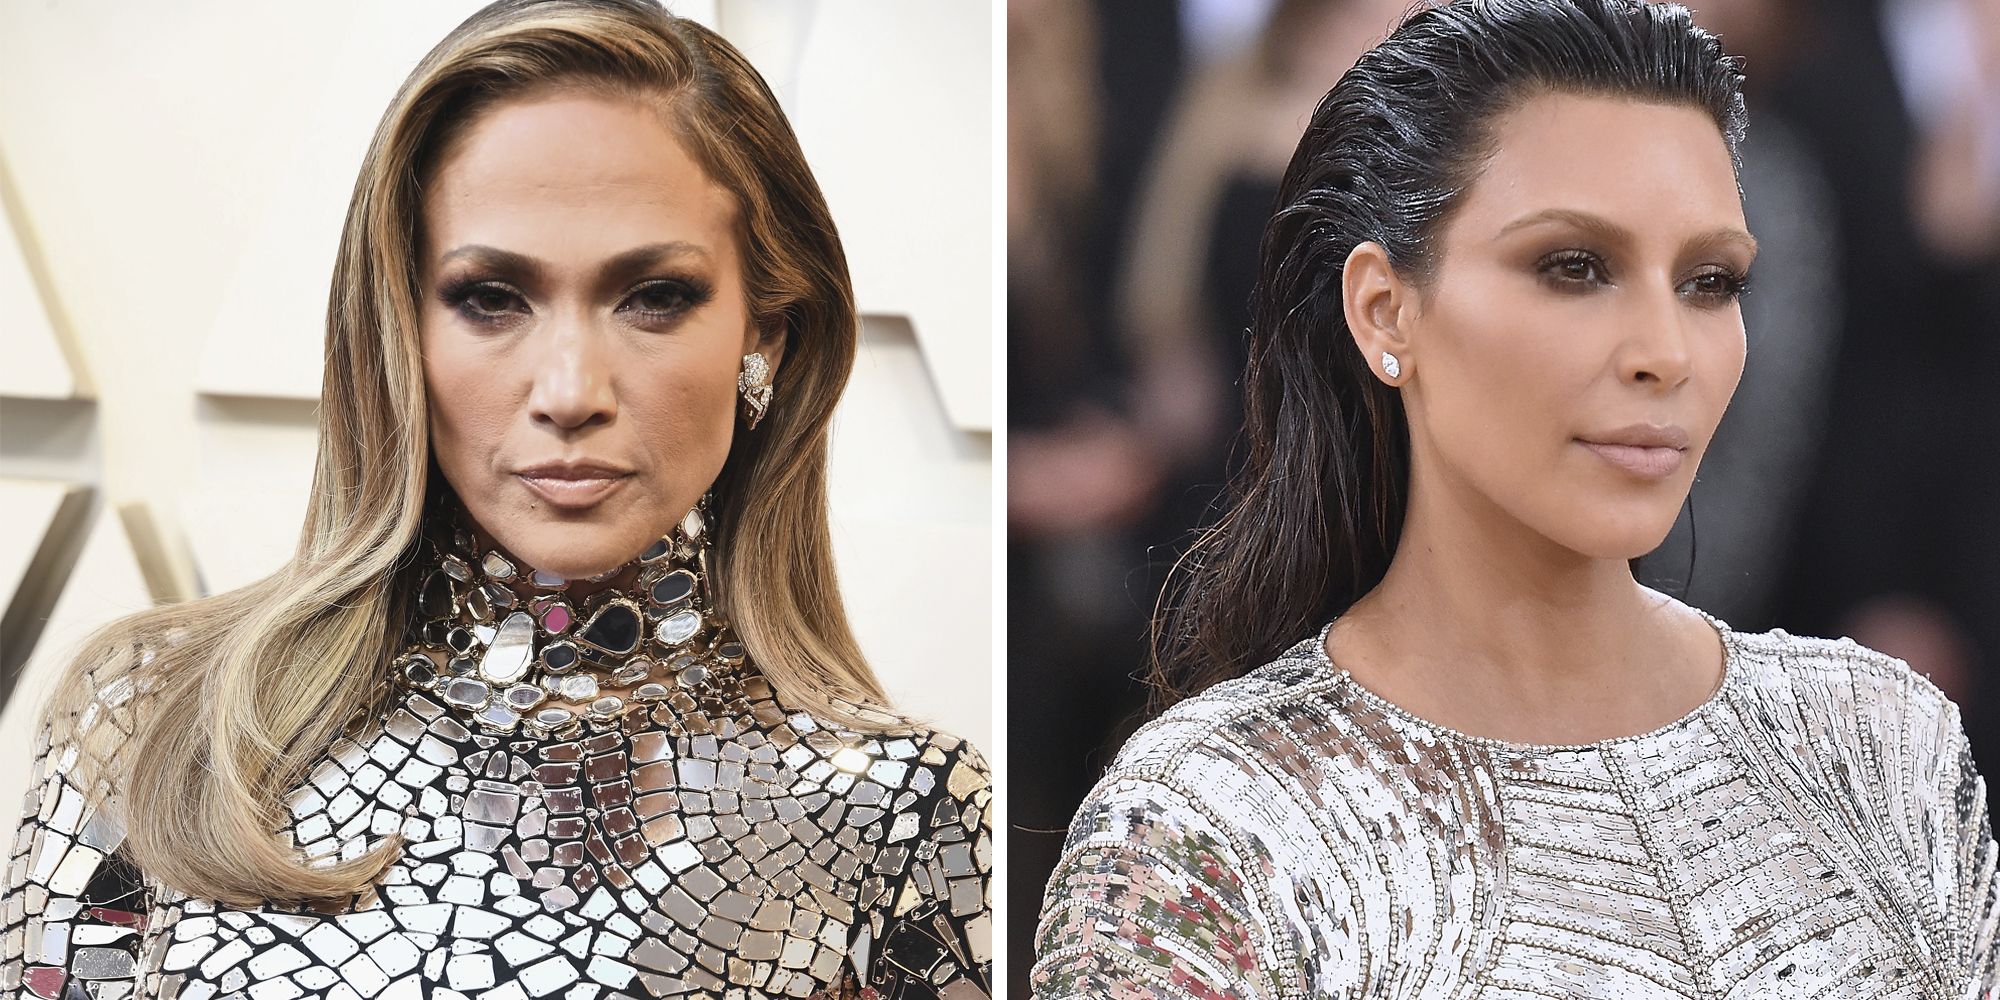 jlo before and after plastic surgery